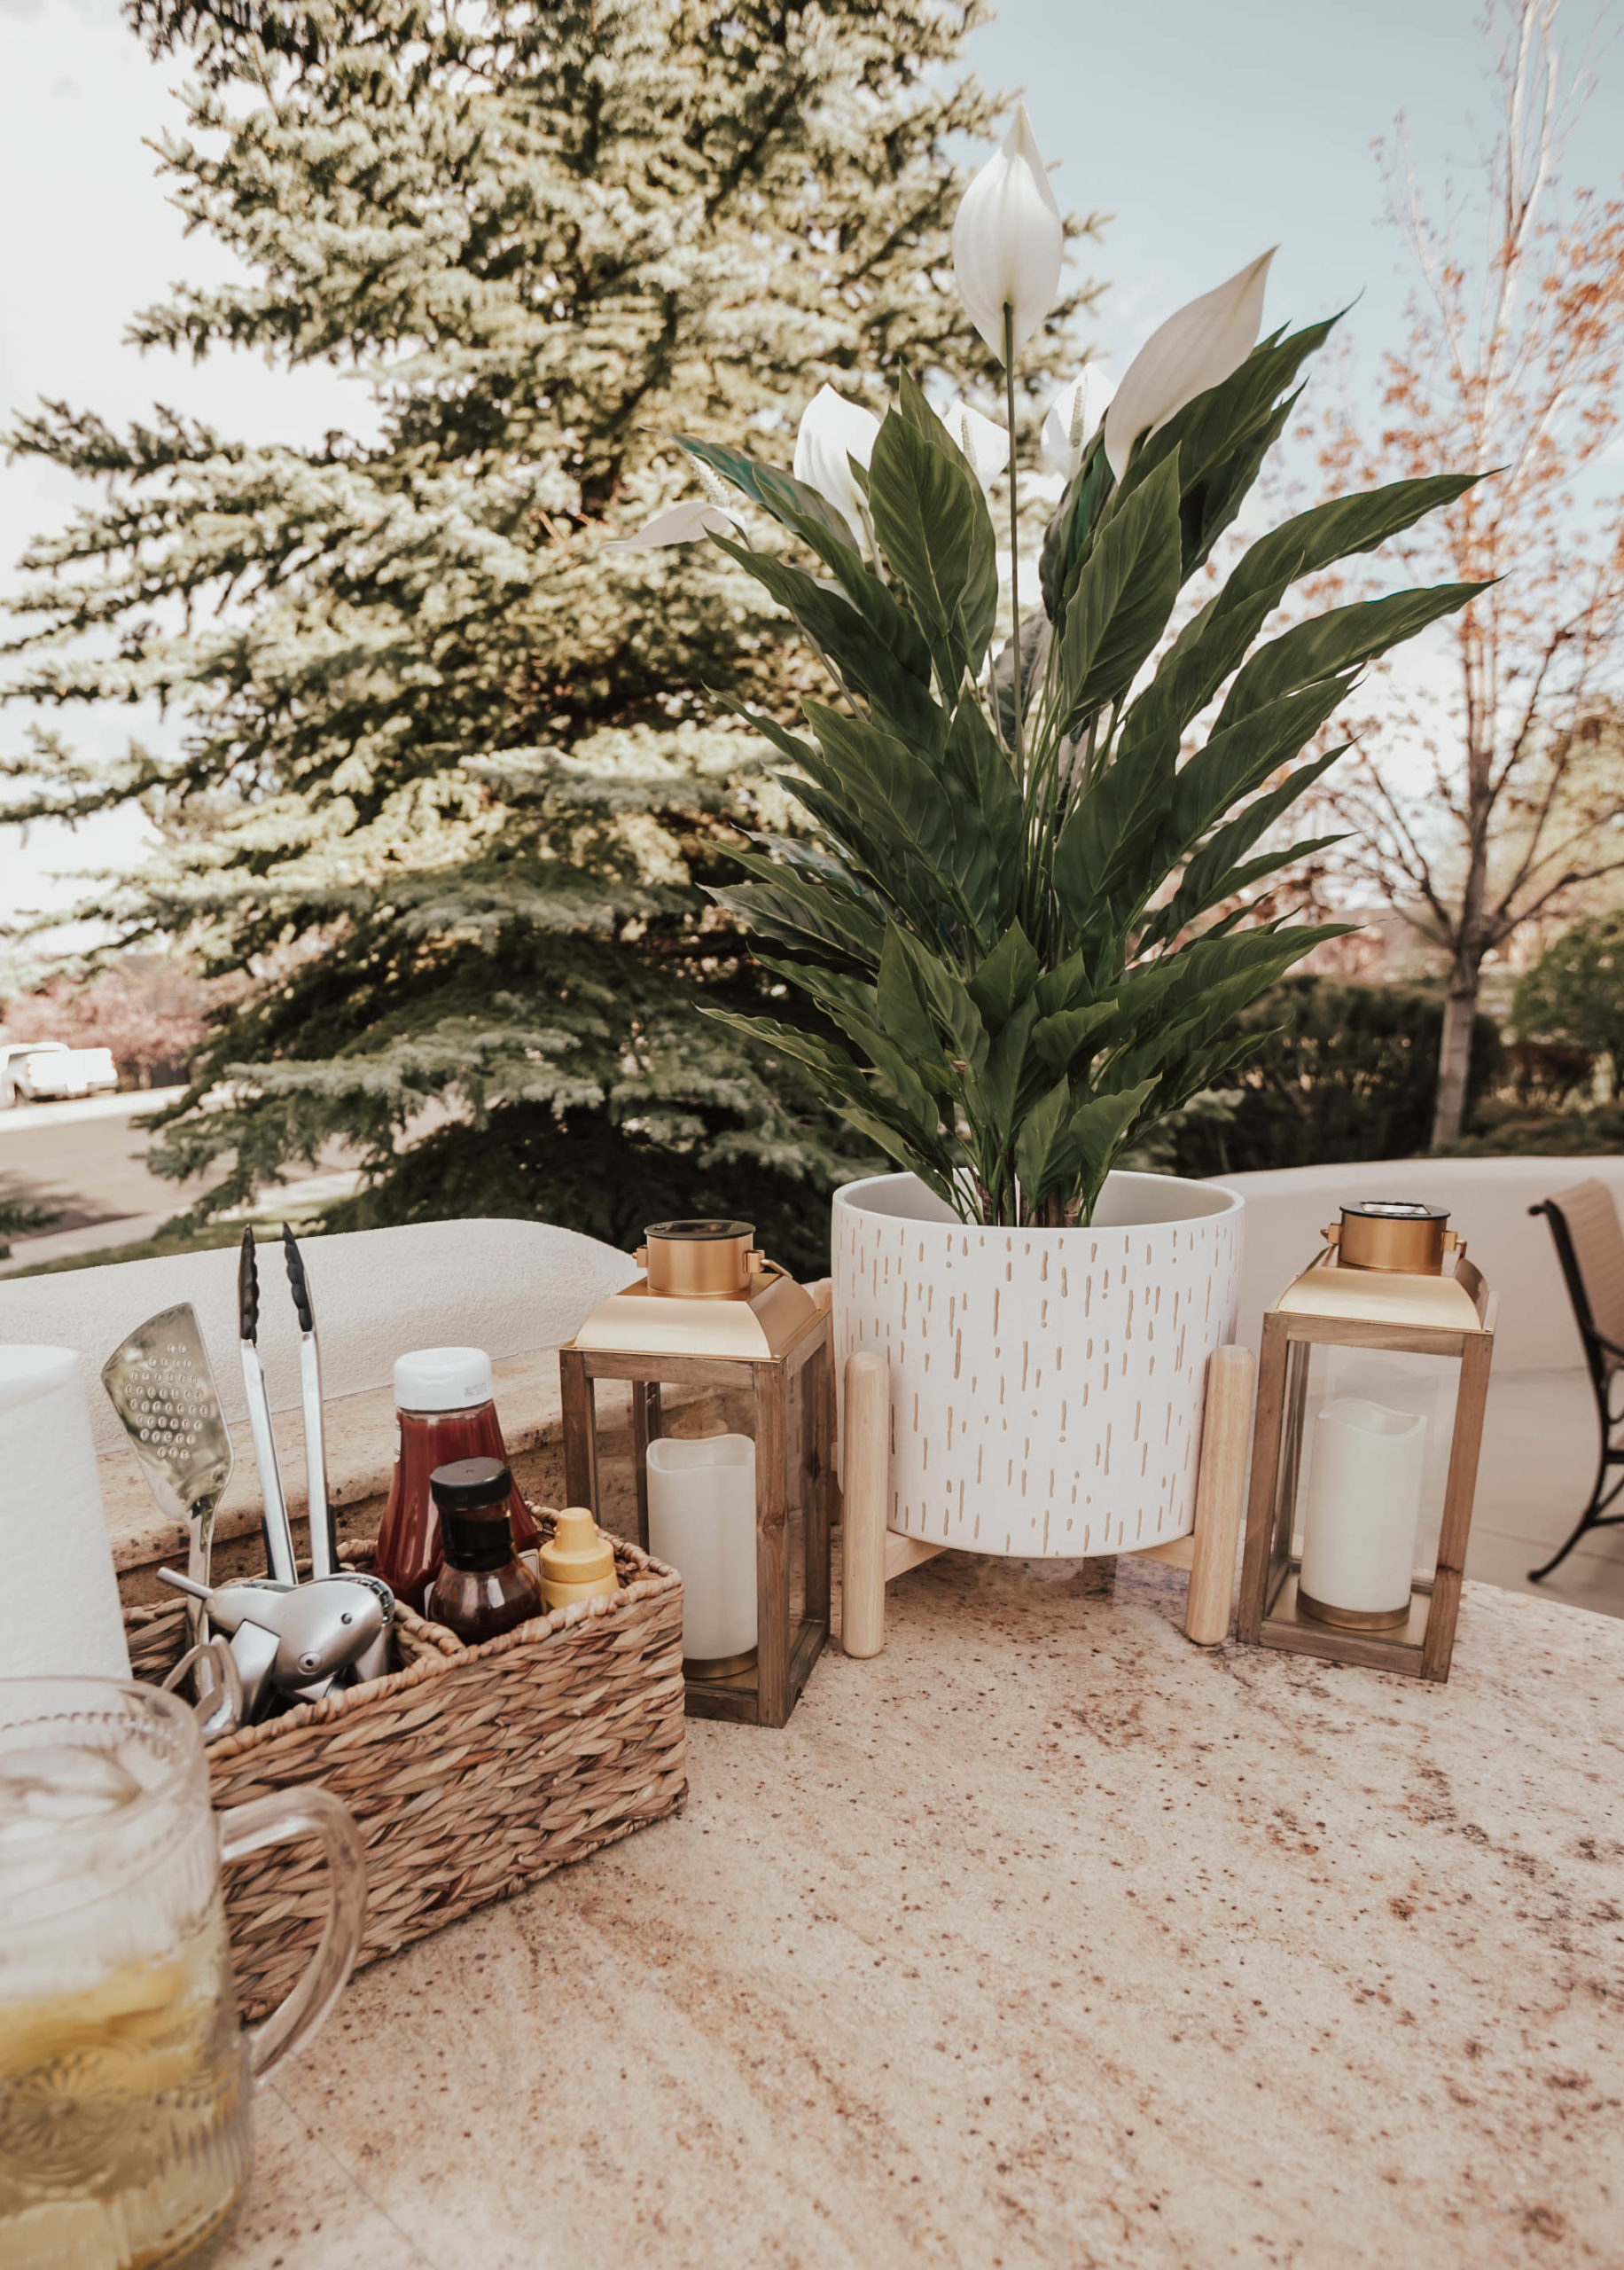 Reno blogger, Ashley Zeal Hurd, from The Ashley and Emily Blog shares Walmart patio items to spruce up your outdoor space.